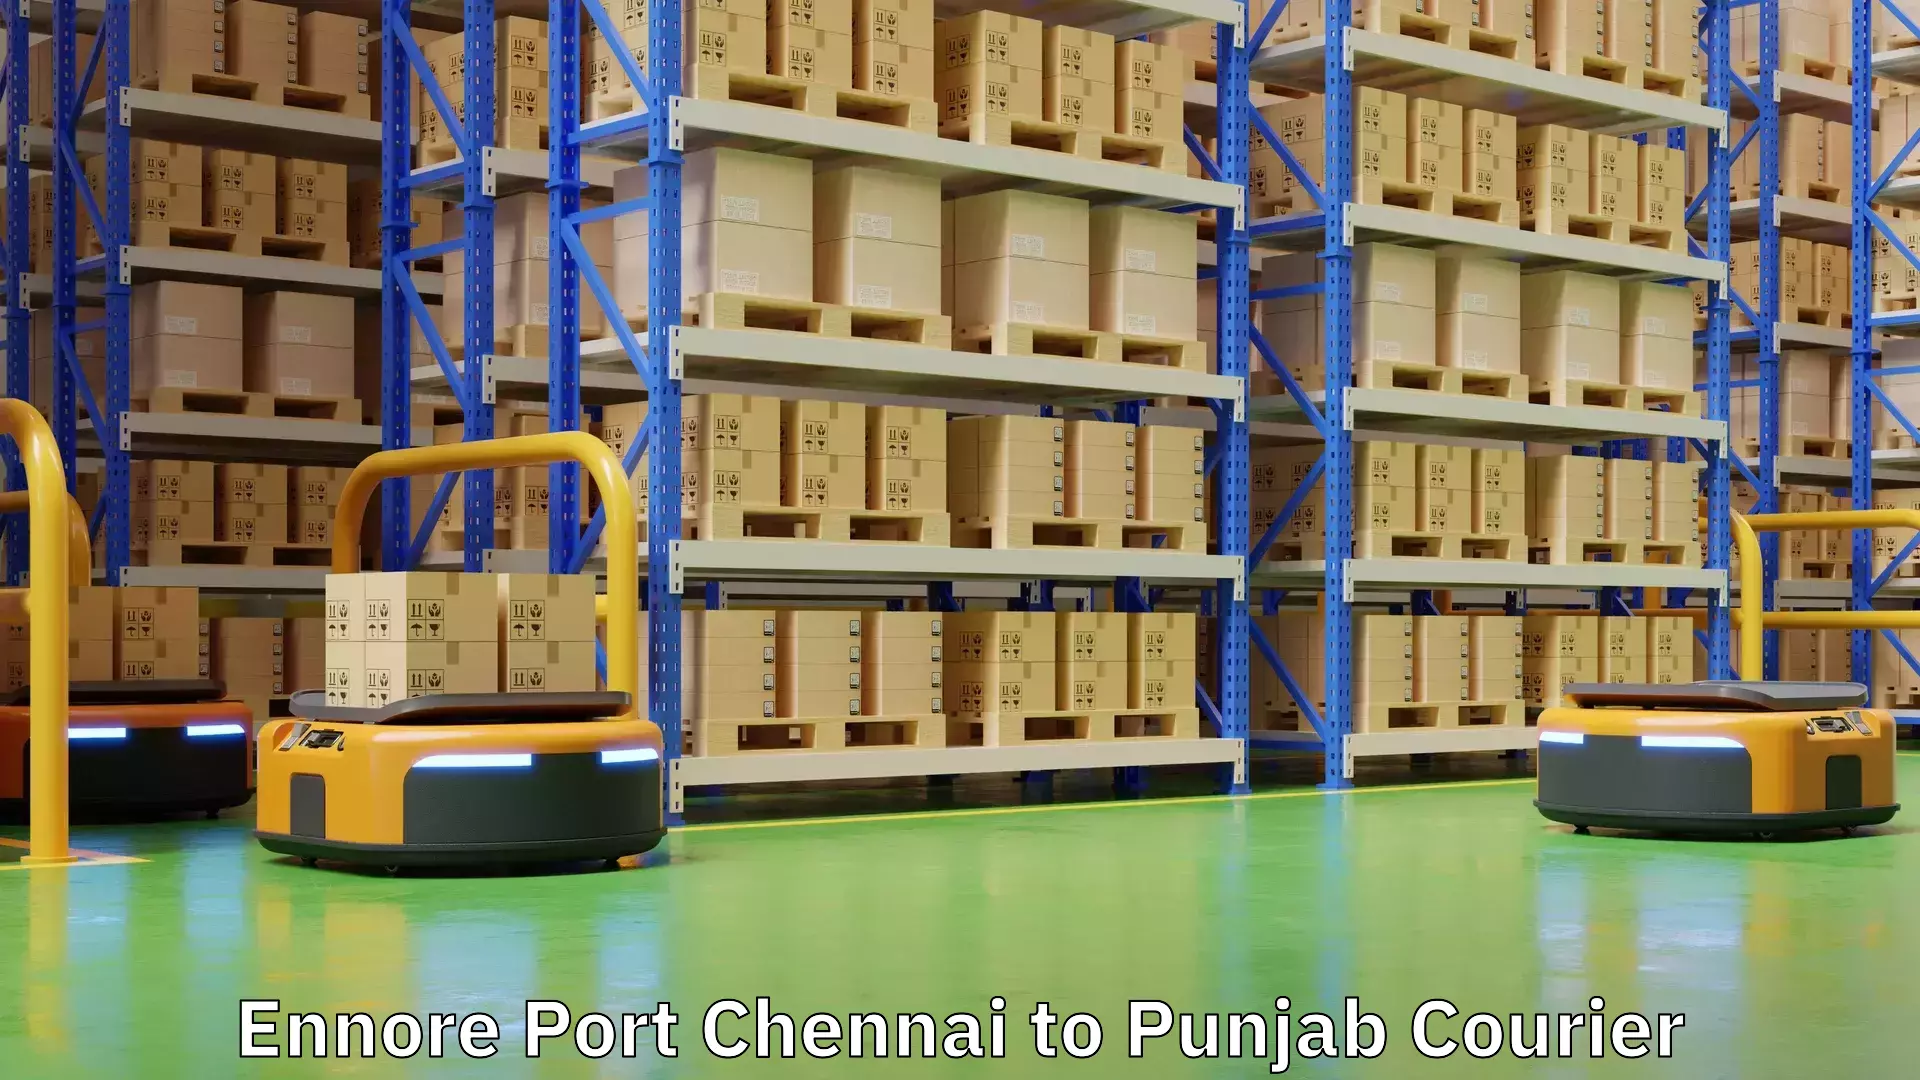 Express delivery network Ennore Port Chennai to Punjab